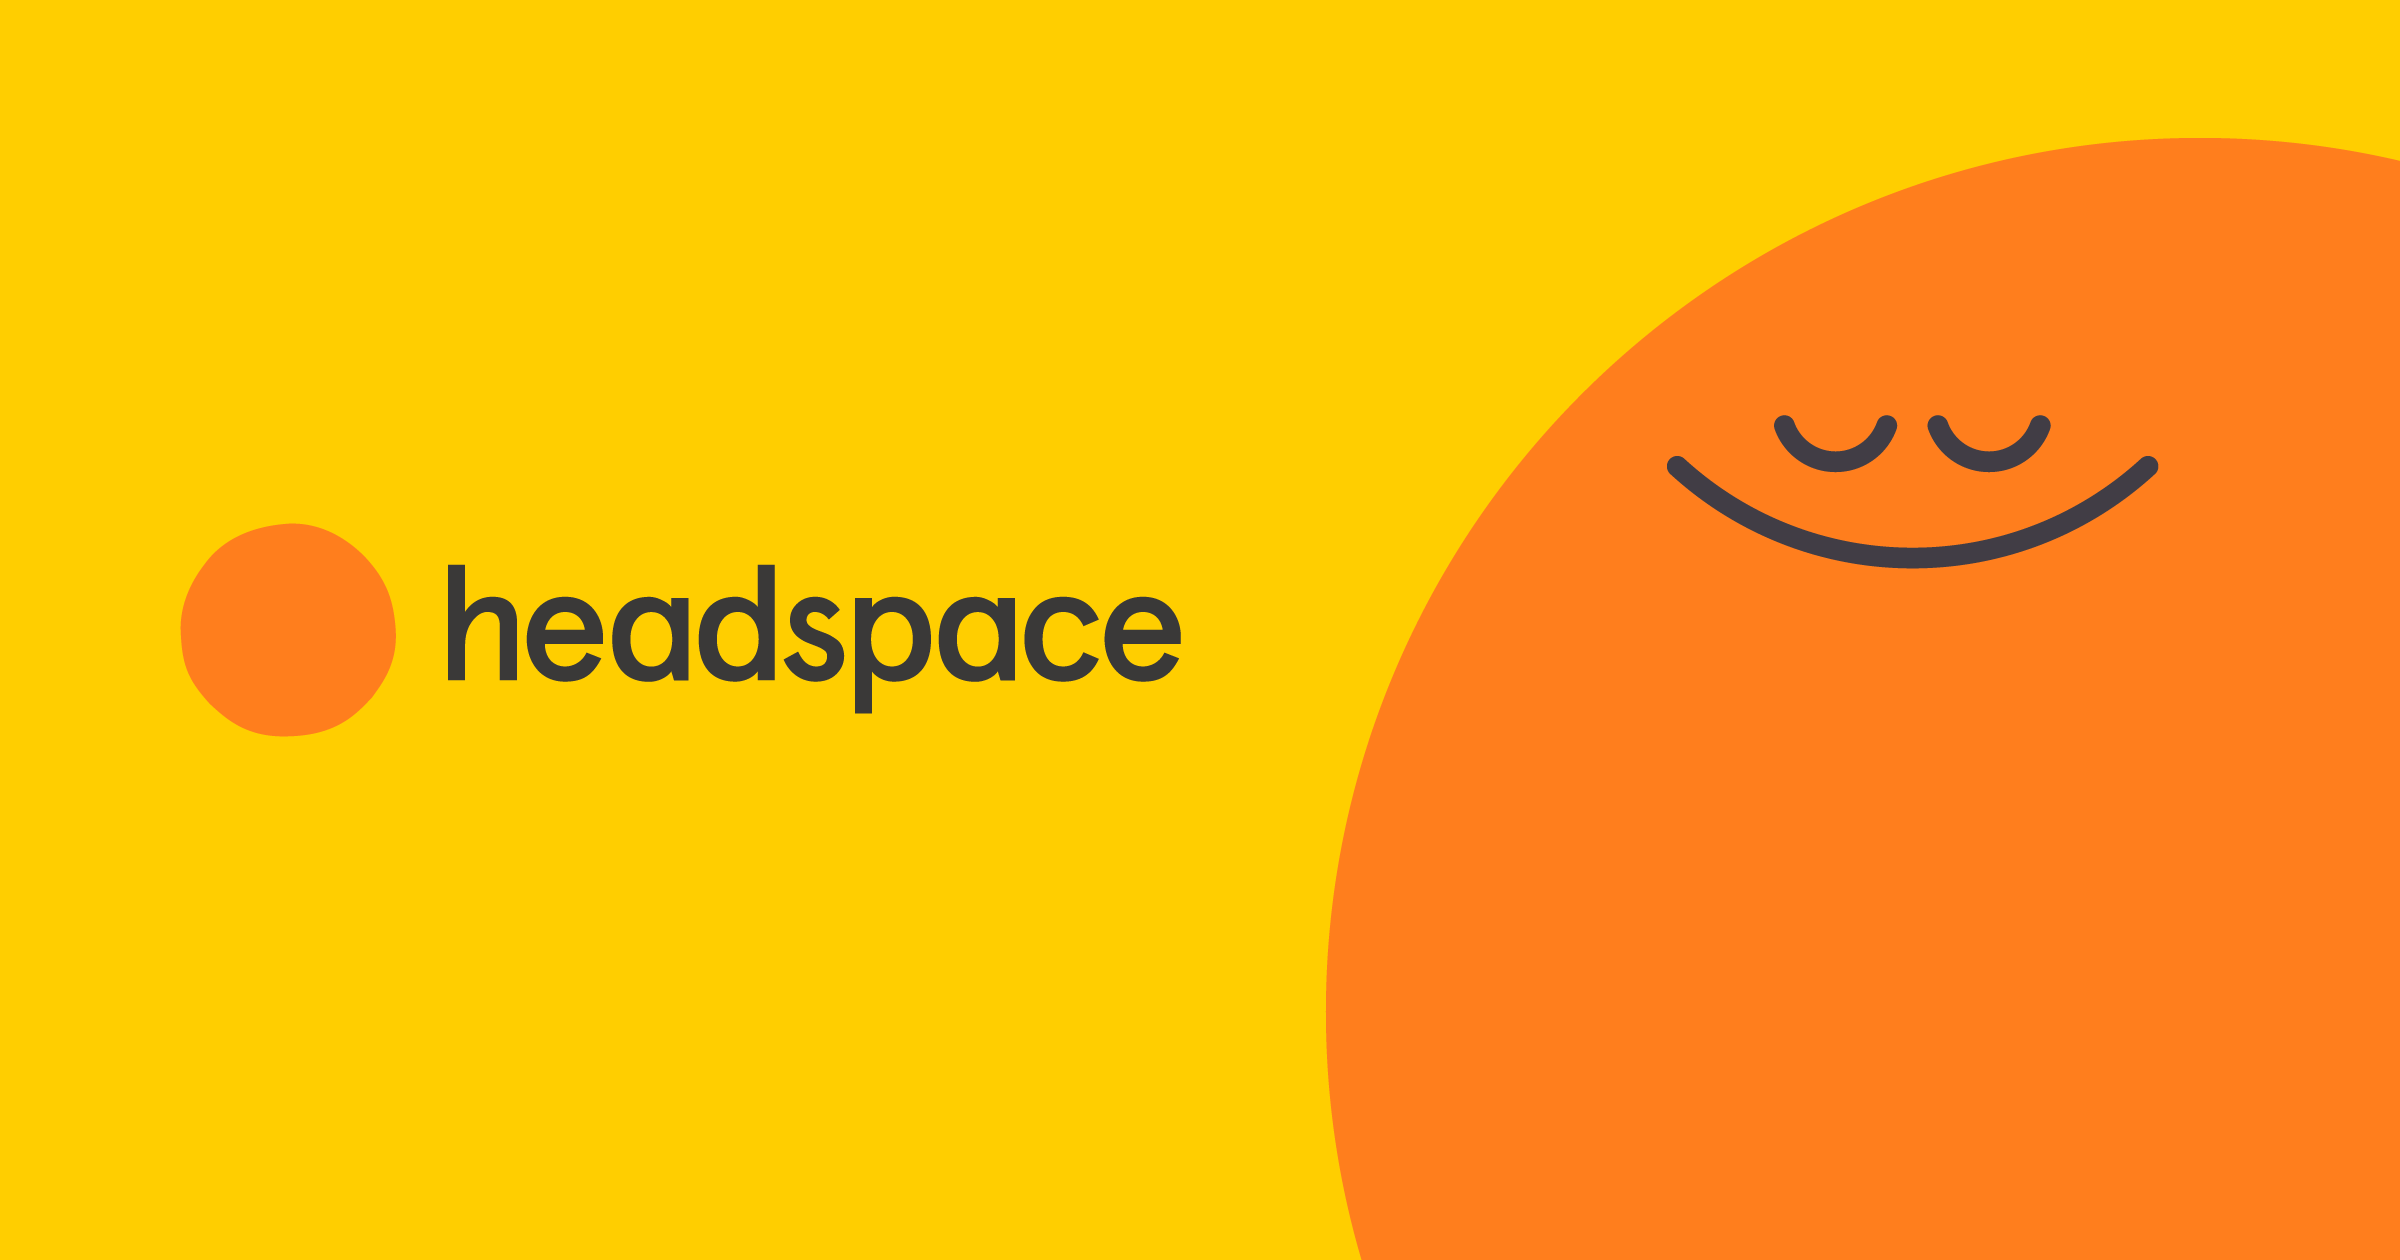 Mindful Meditation App Headspace Closes $105M Debt Facility